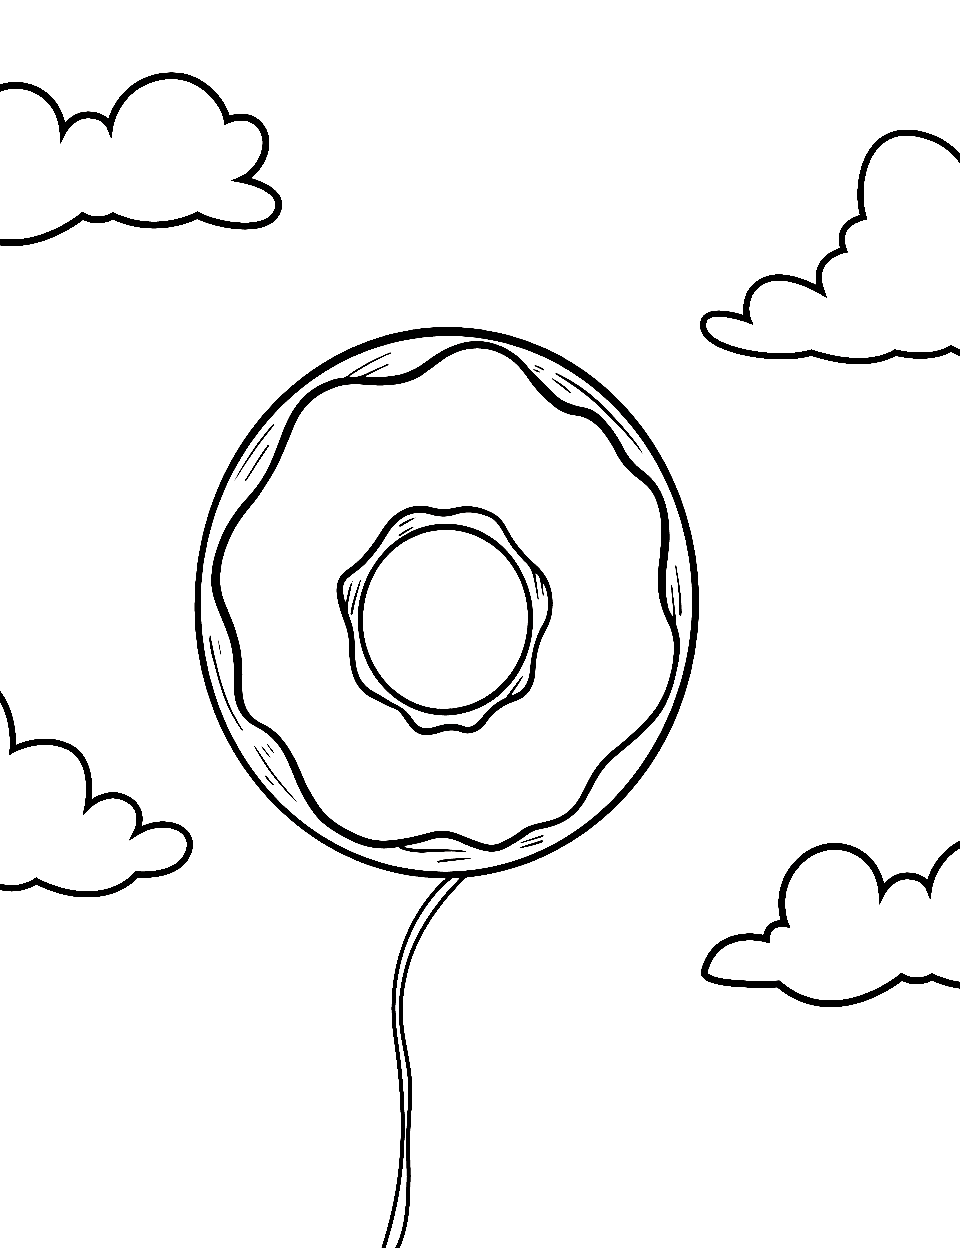 Donut Balloon Coloring Page - A donut shaped like a balloon floating in the sky.